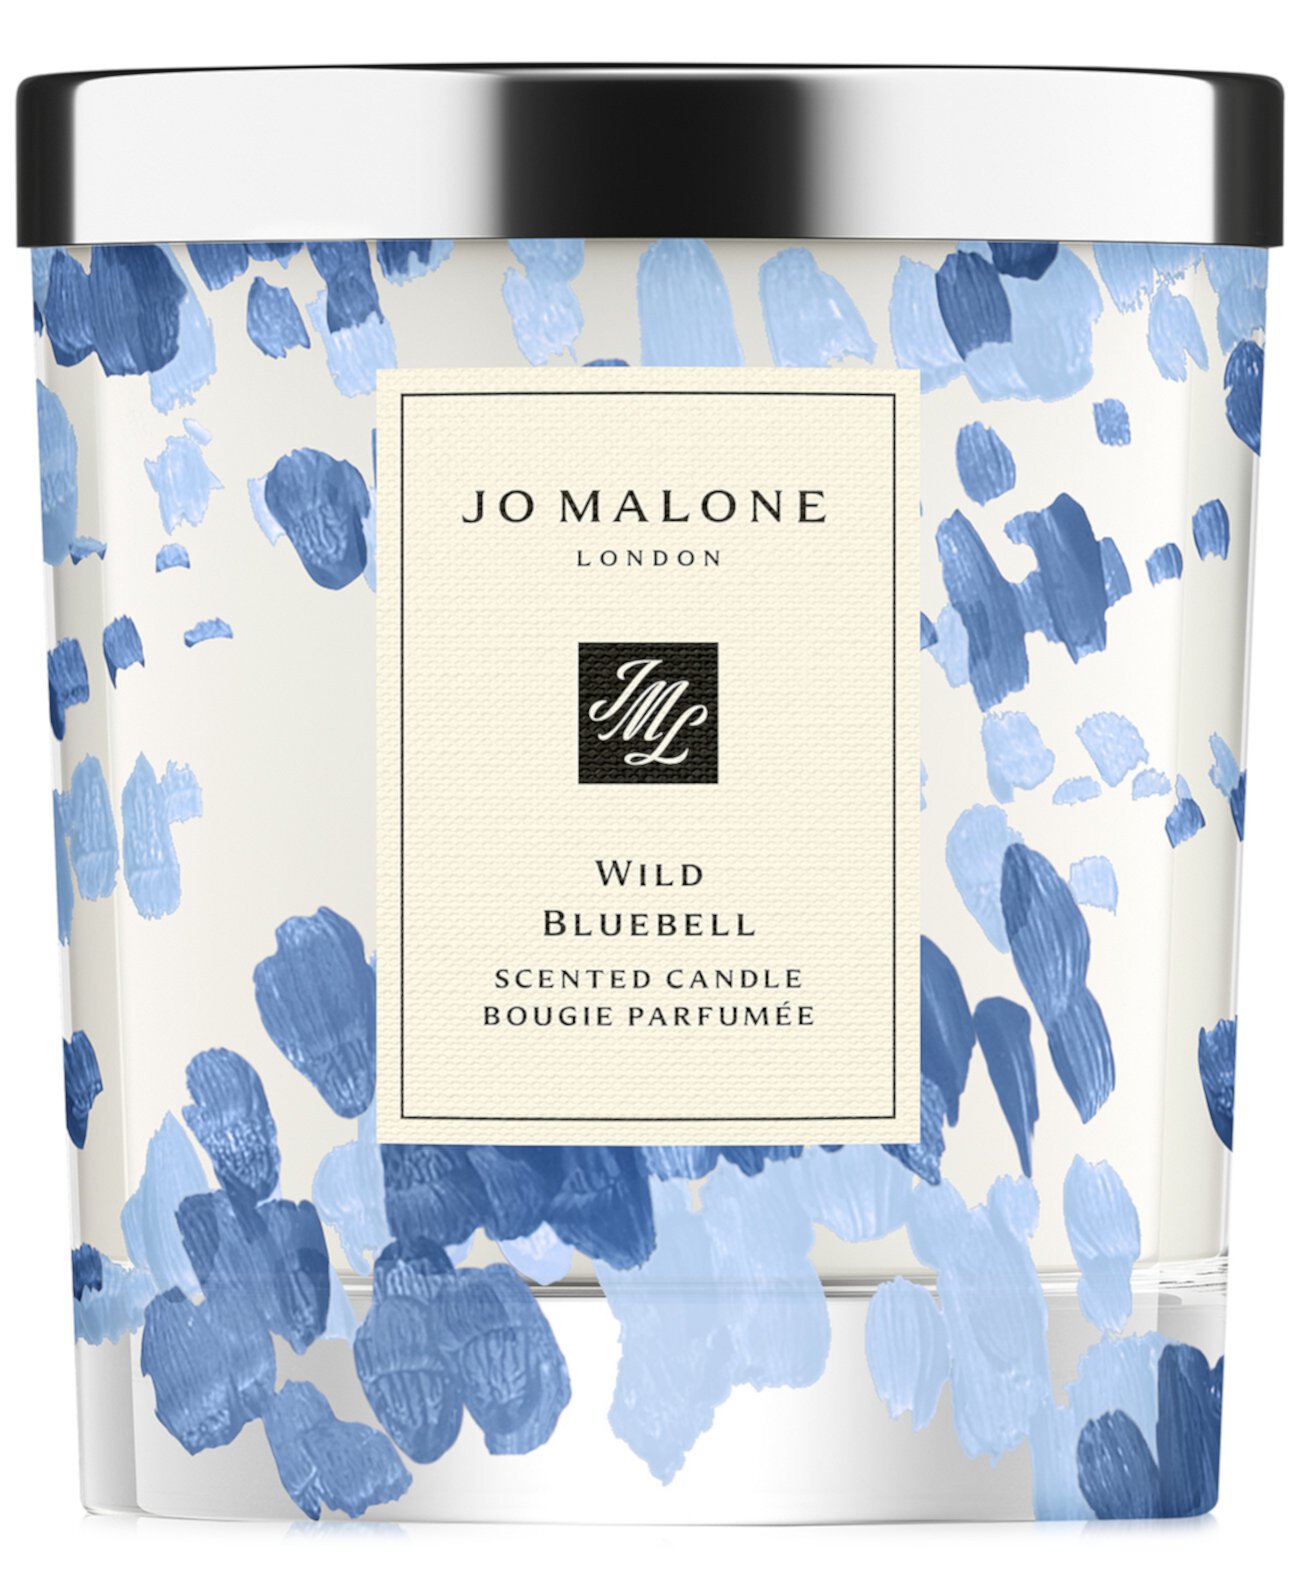 Wild Bluebell Decorated Home Candle, 7-oz. Jo Malone London